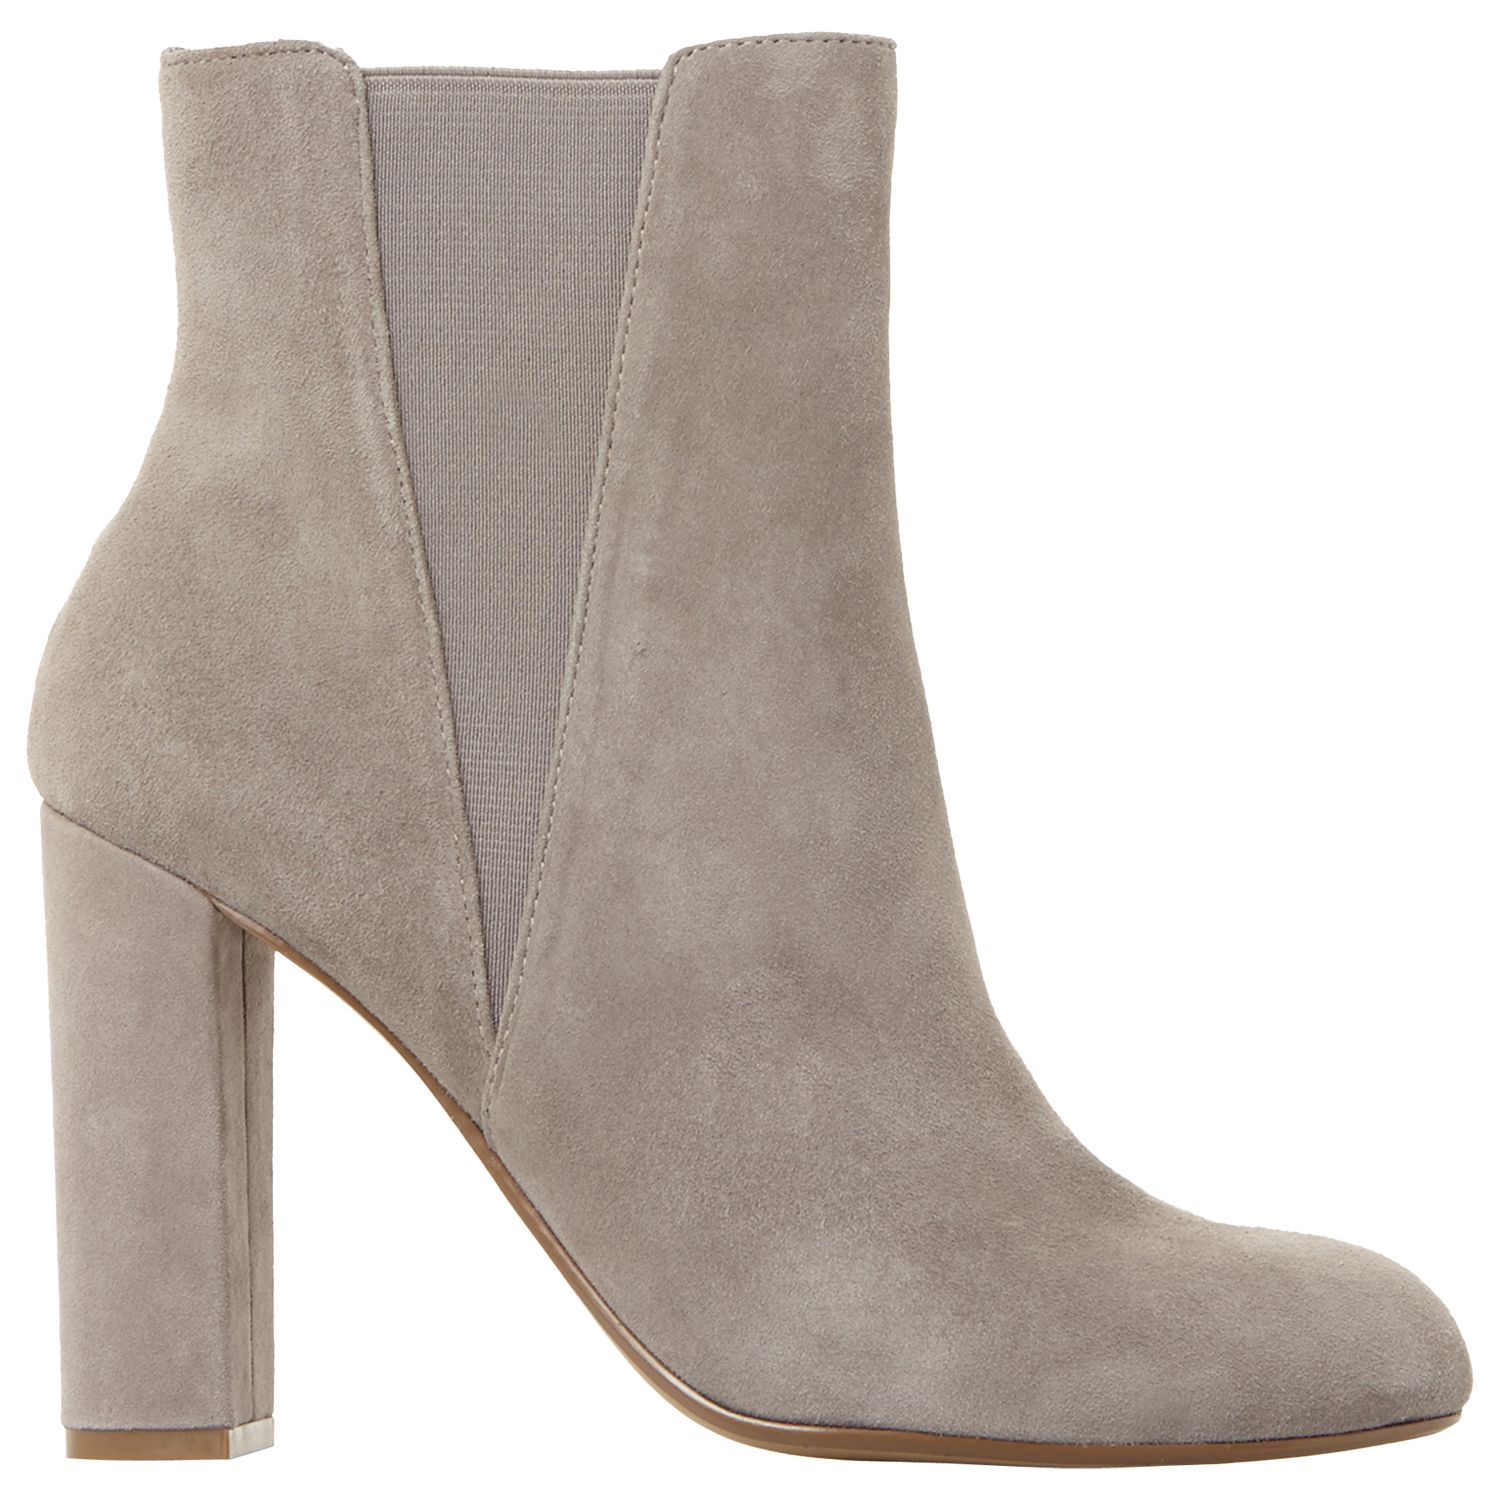 Steve Madden Effect Block Heeled Ankle Boots, Grey Suede at John Lewis ...